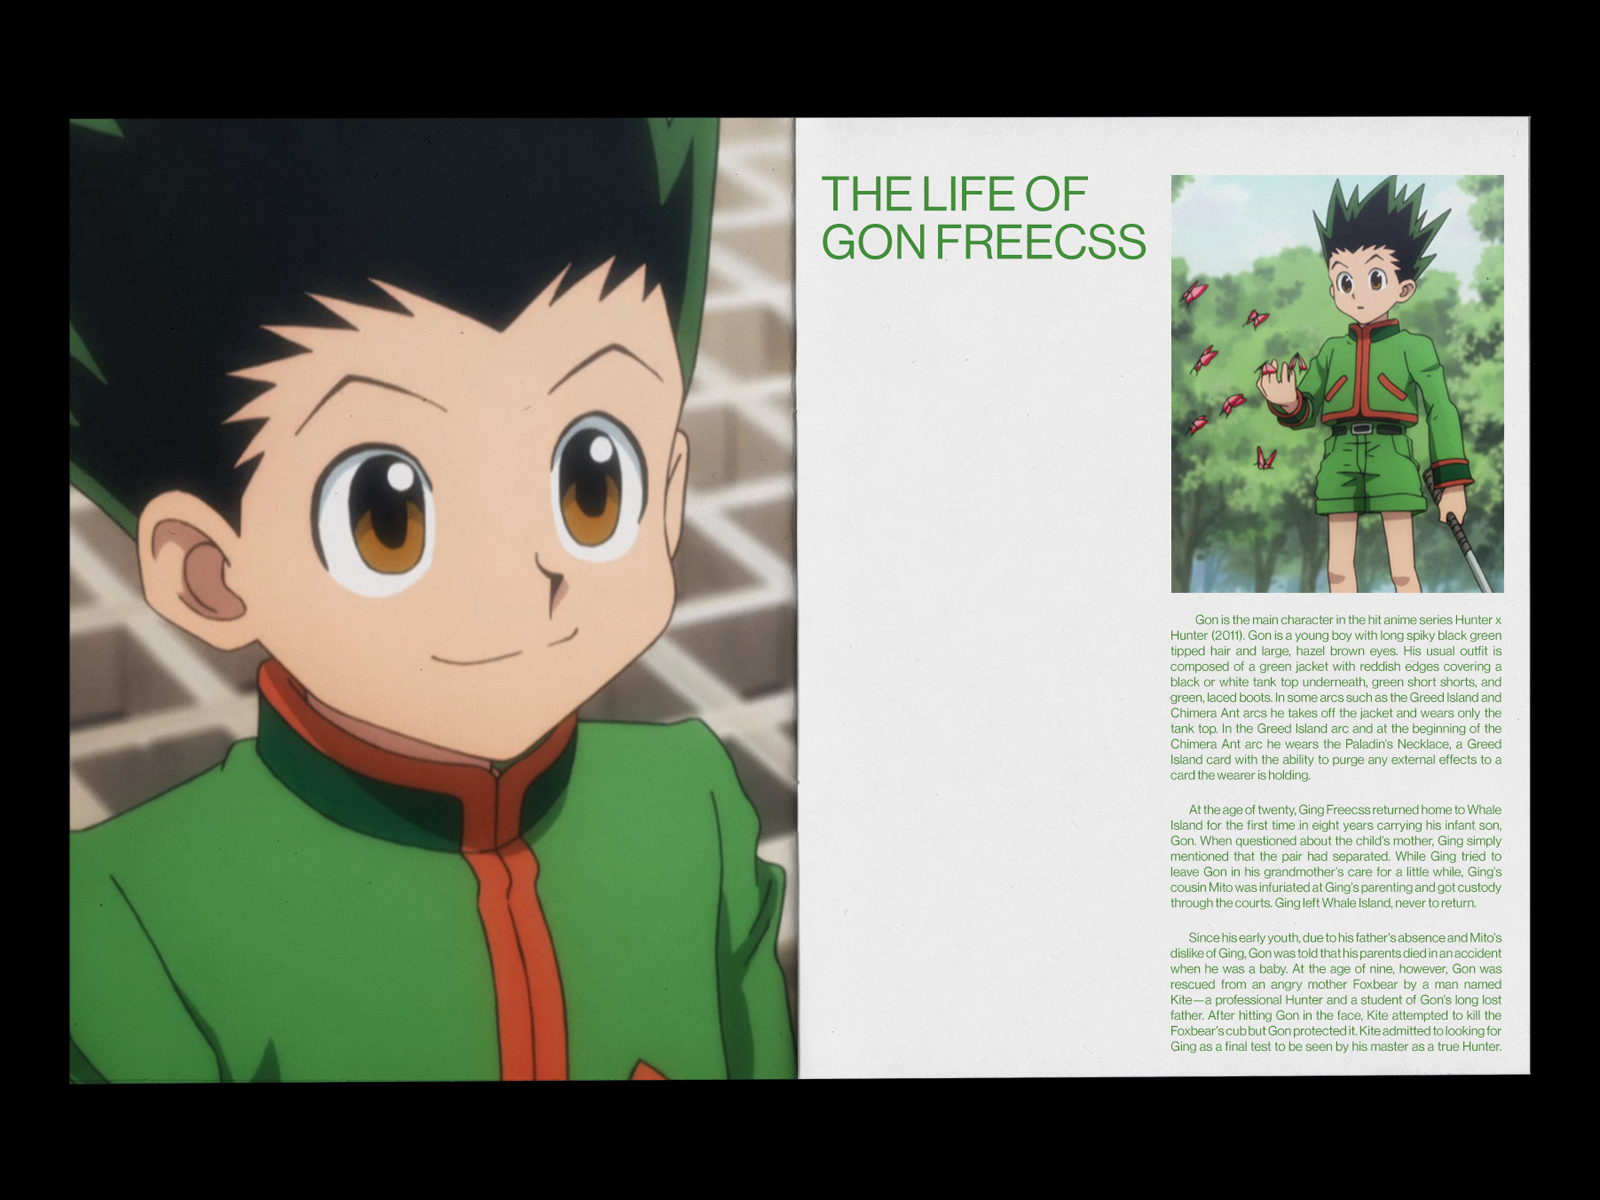 The Life of Gon Freecss 2/3 by Cameron Hall on Dribbble